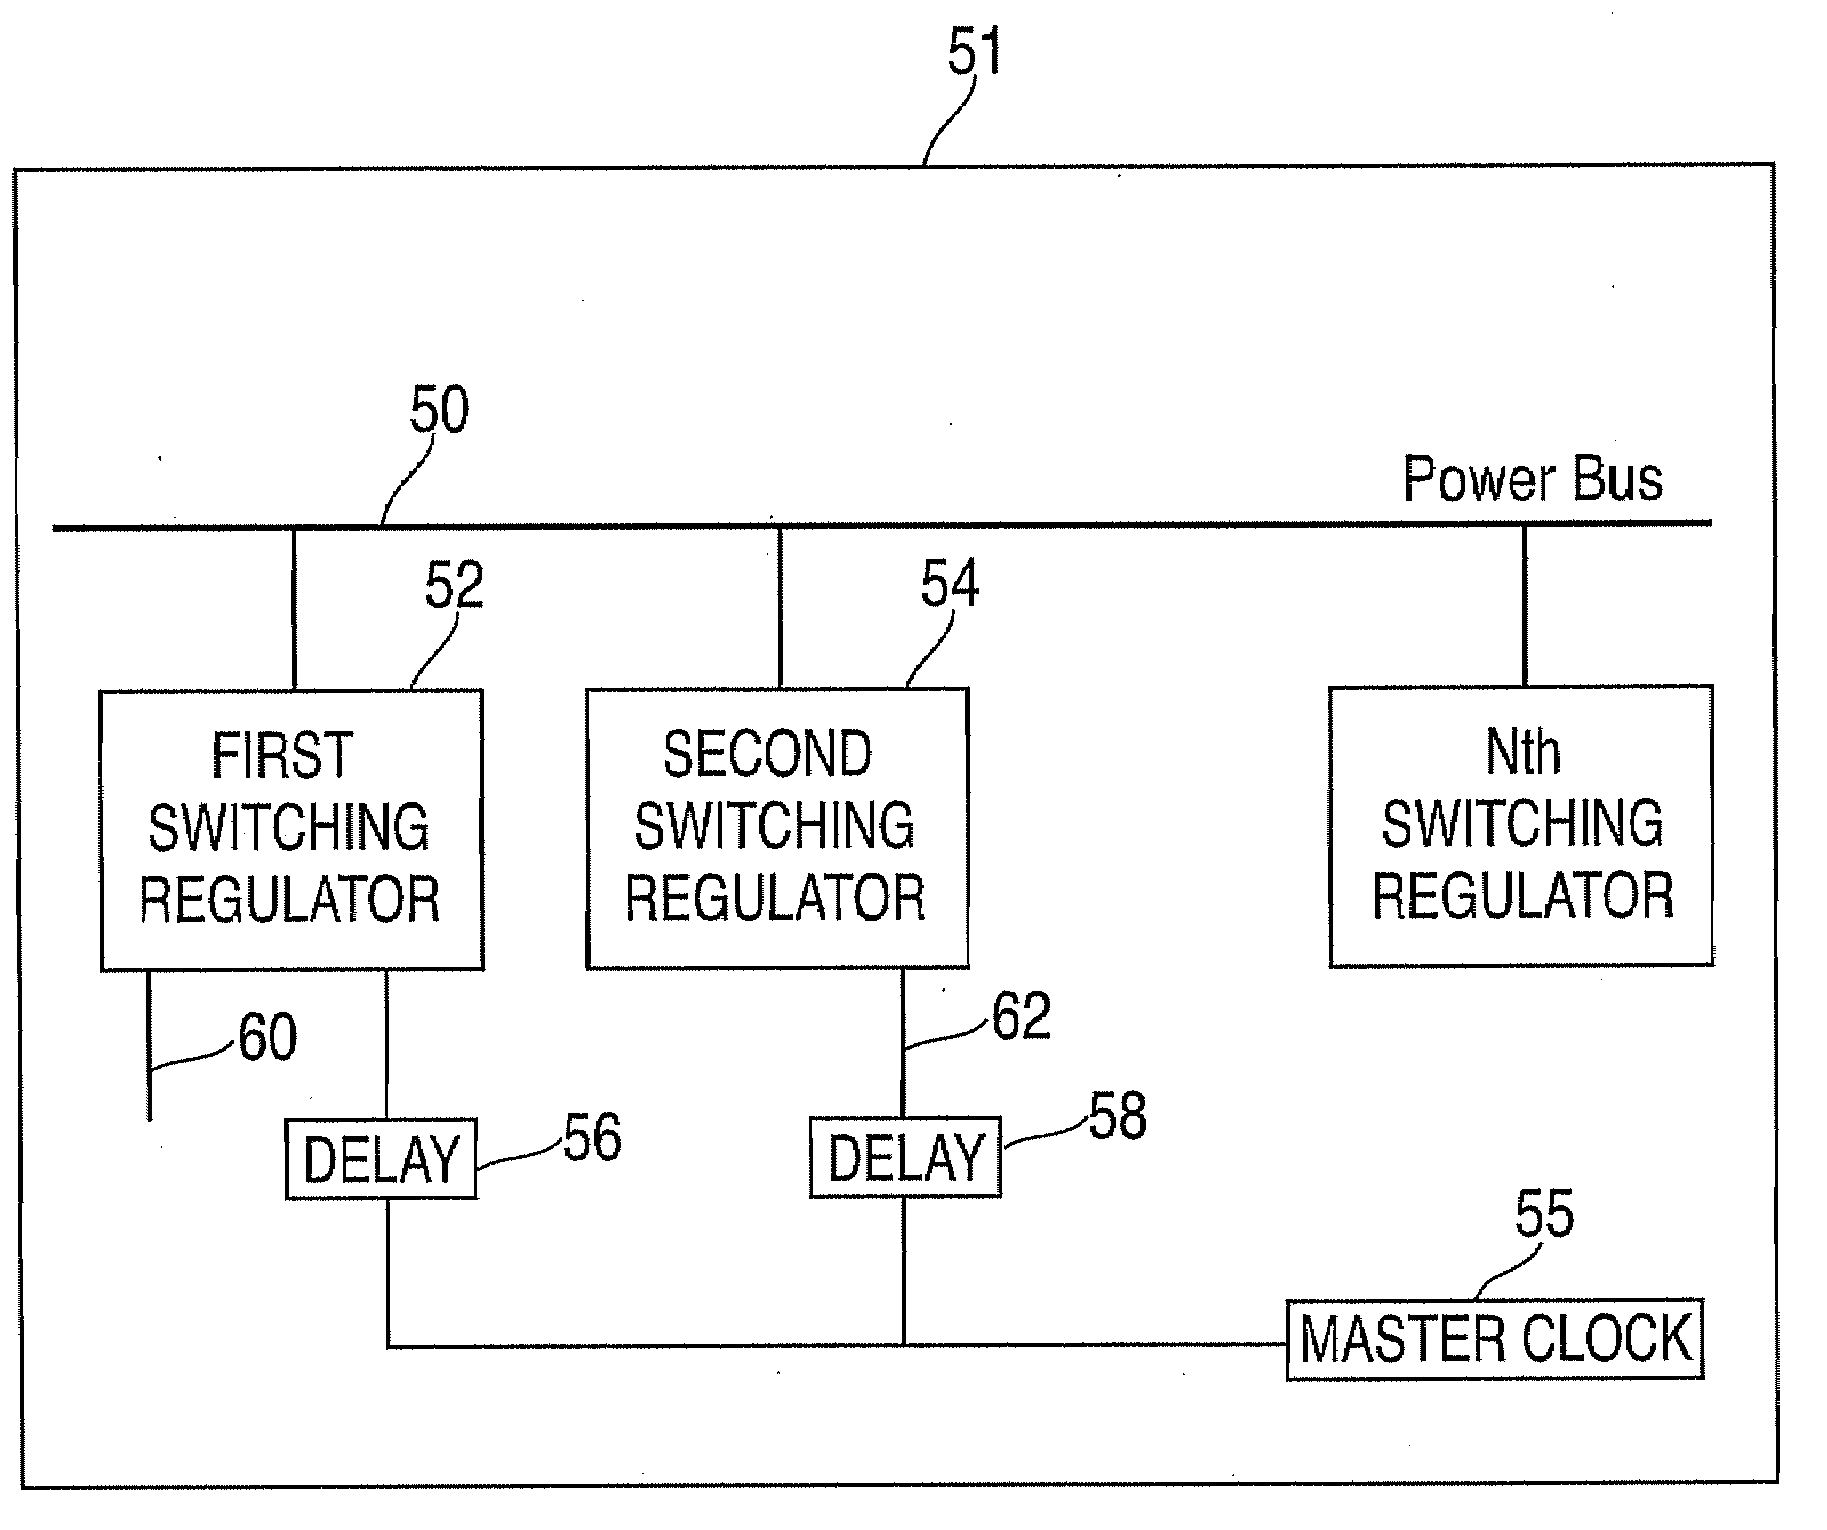 Power supply system using delay lines in regulator topology to reduce input ripple voltage